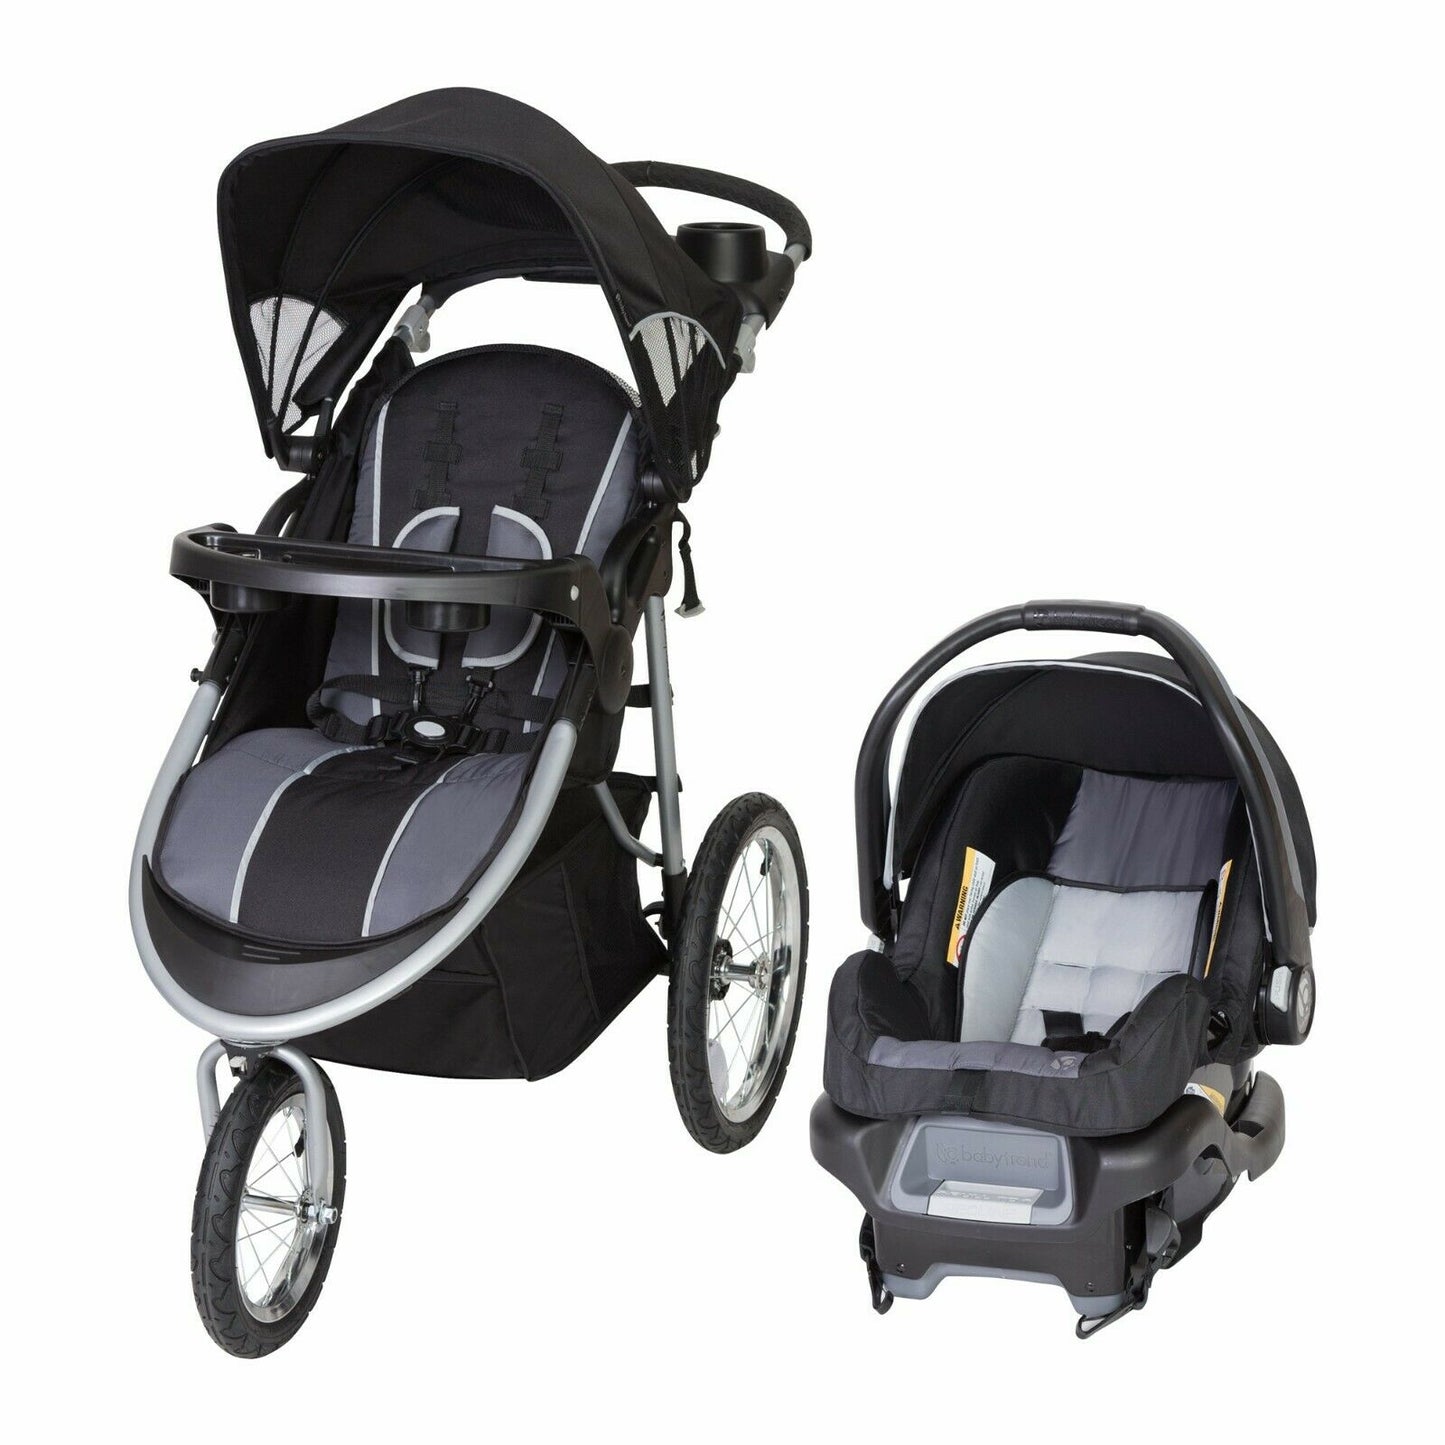 Baby Jogger Stroller with Car Seat Travel System Infant Toddler Combo